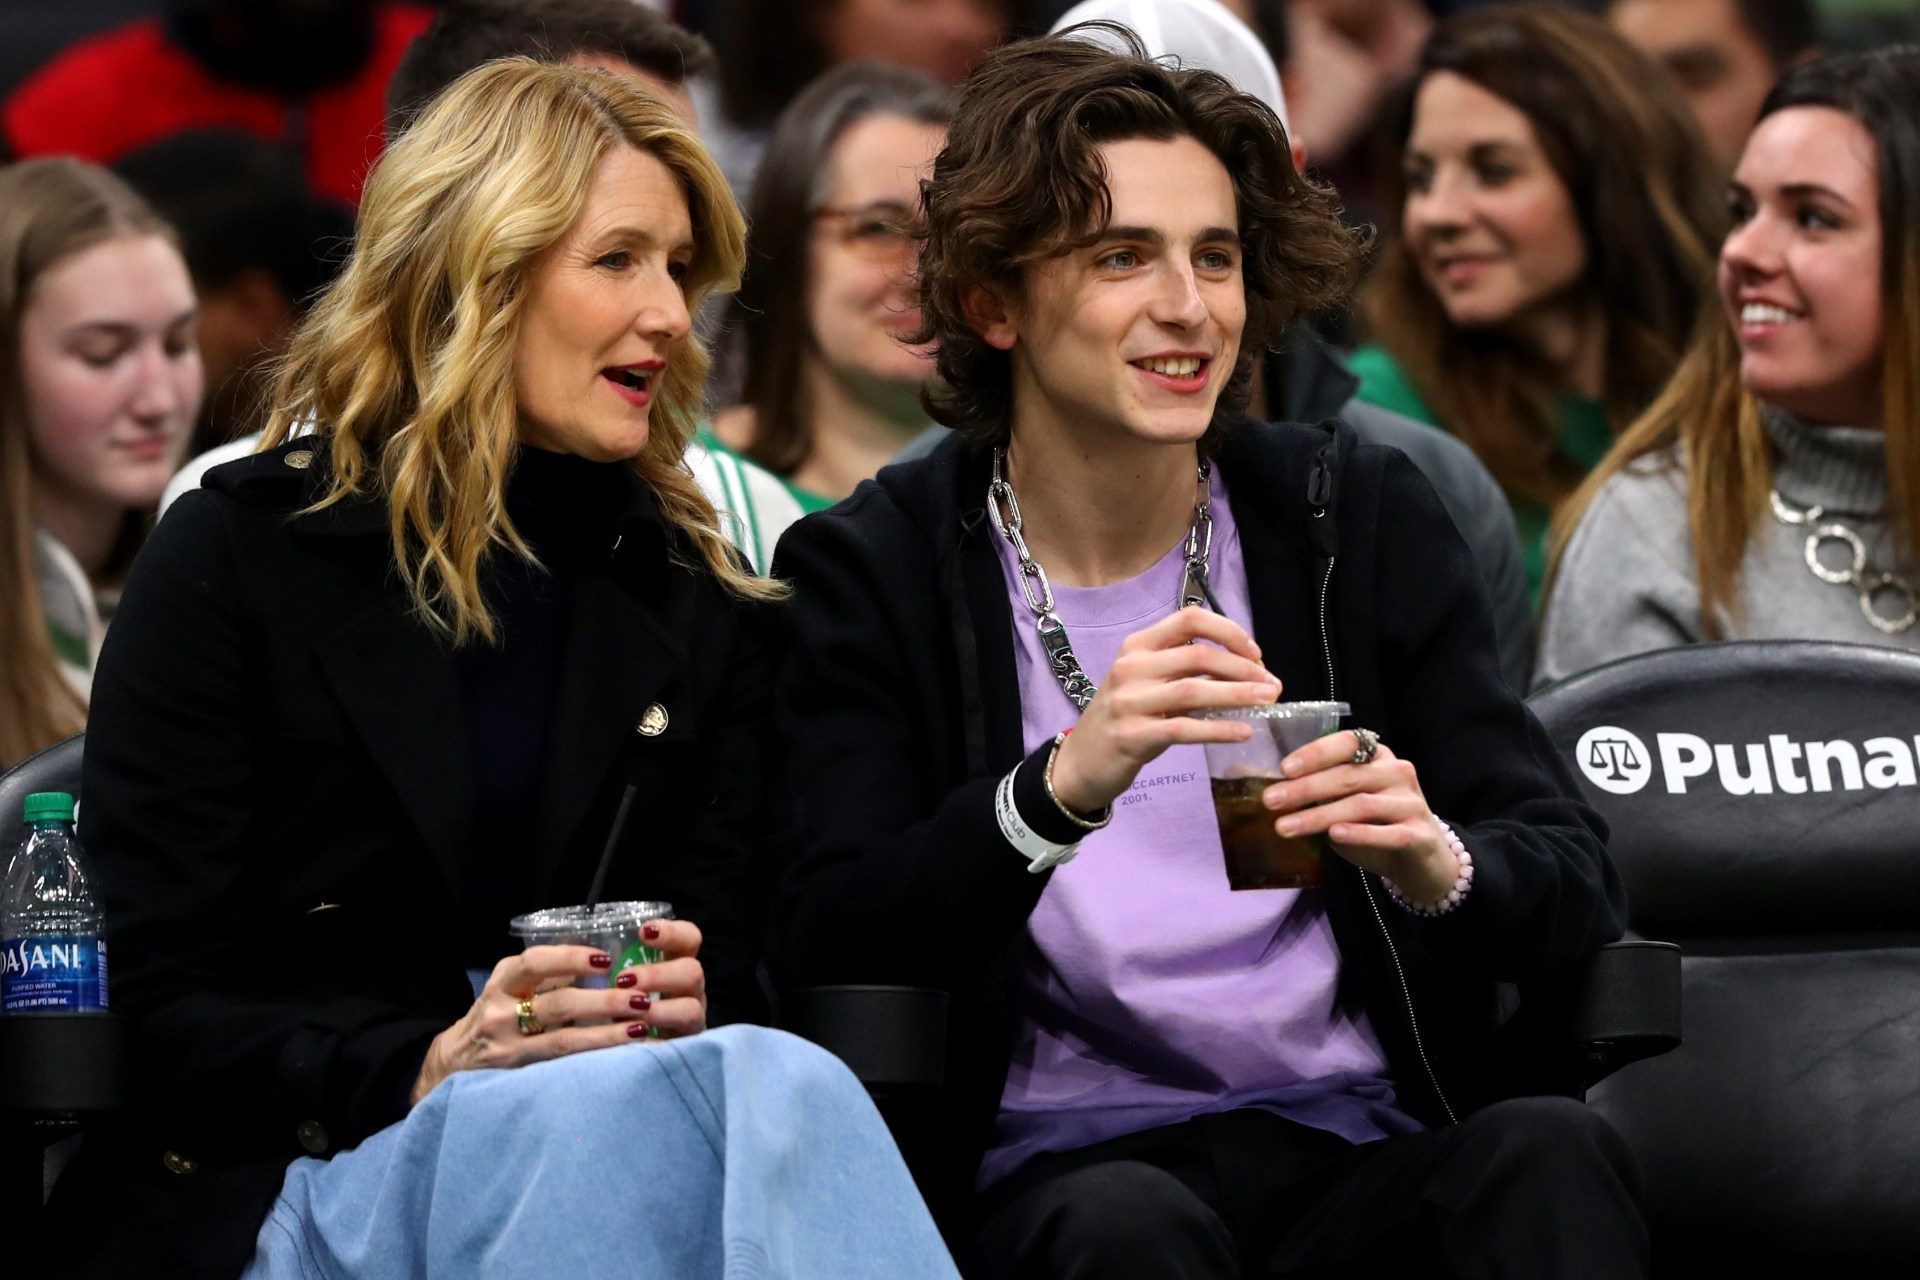 The Best Celebrity Courtside Outfits That Stole the Show